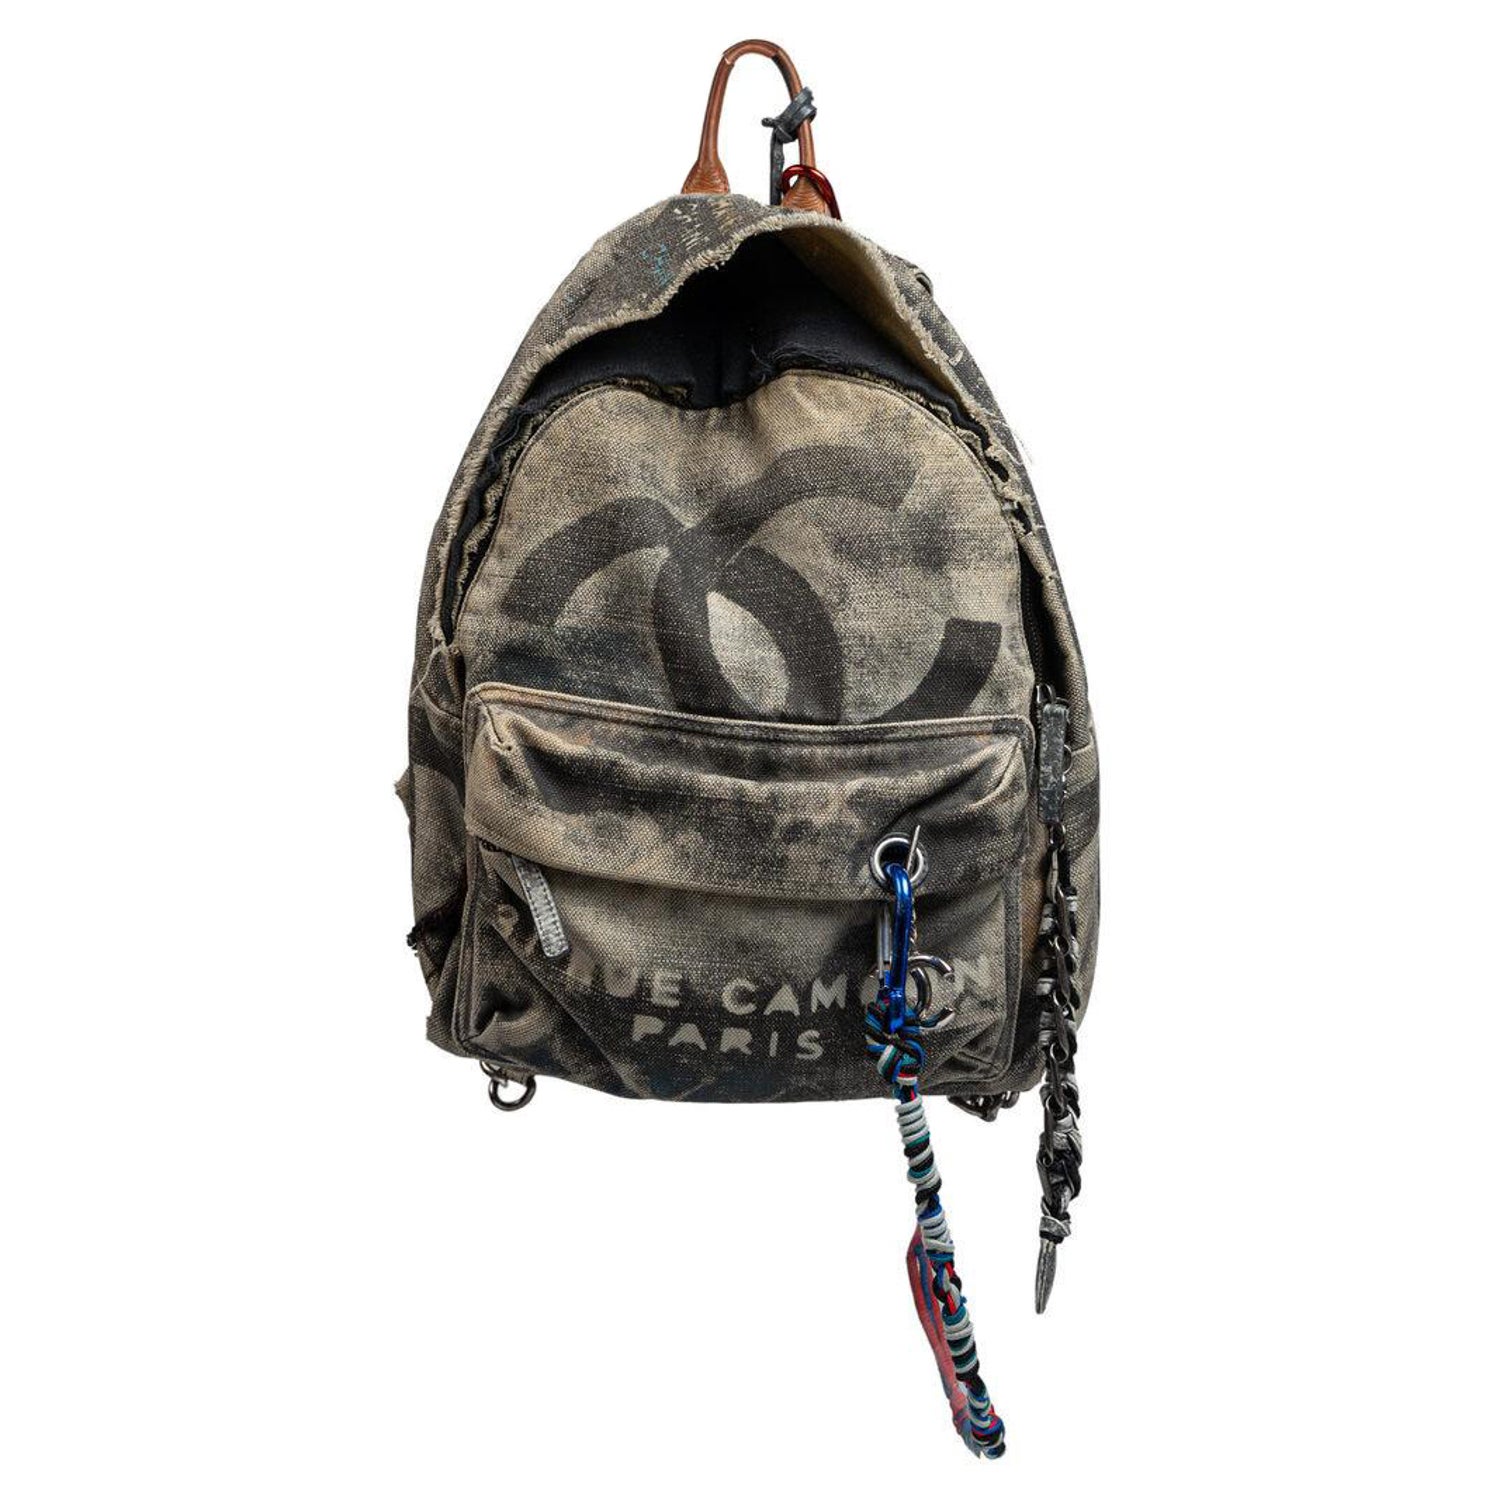 10 alternative canvas backpacks to the Chanel graffiti one